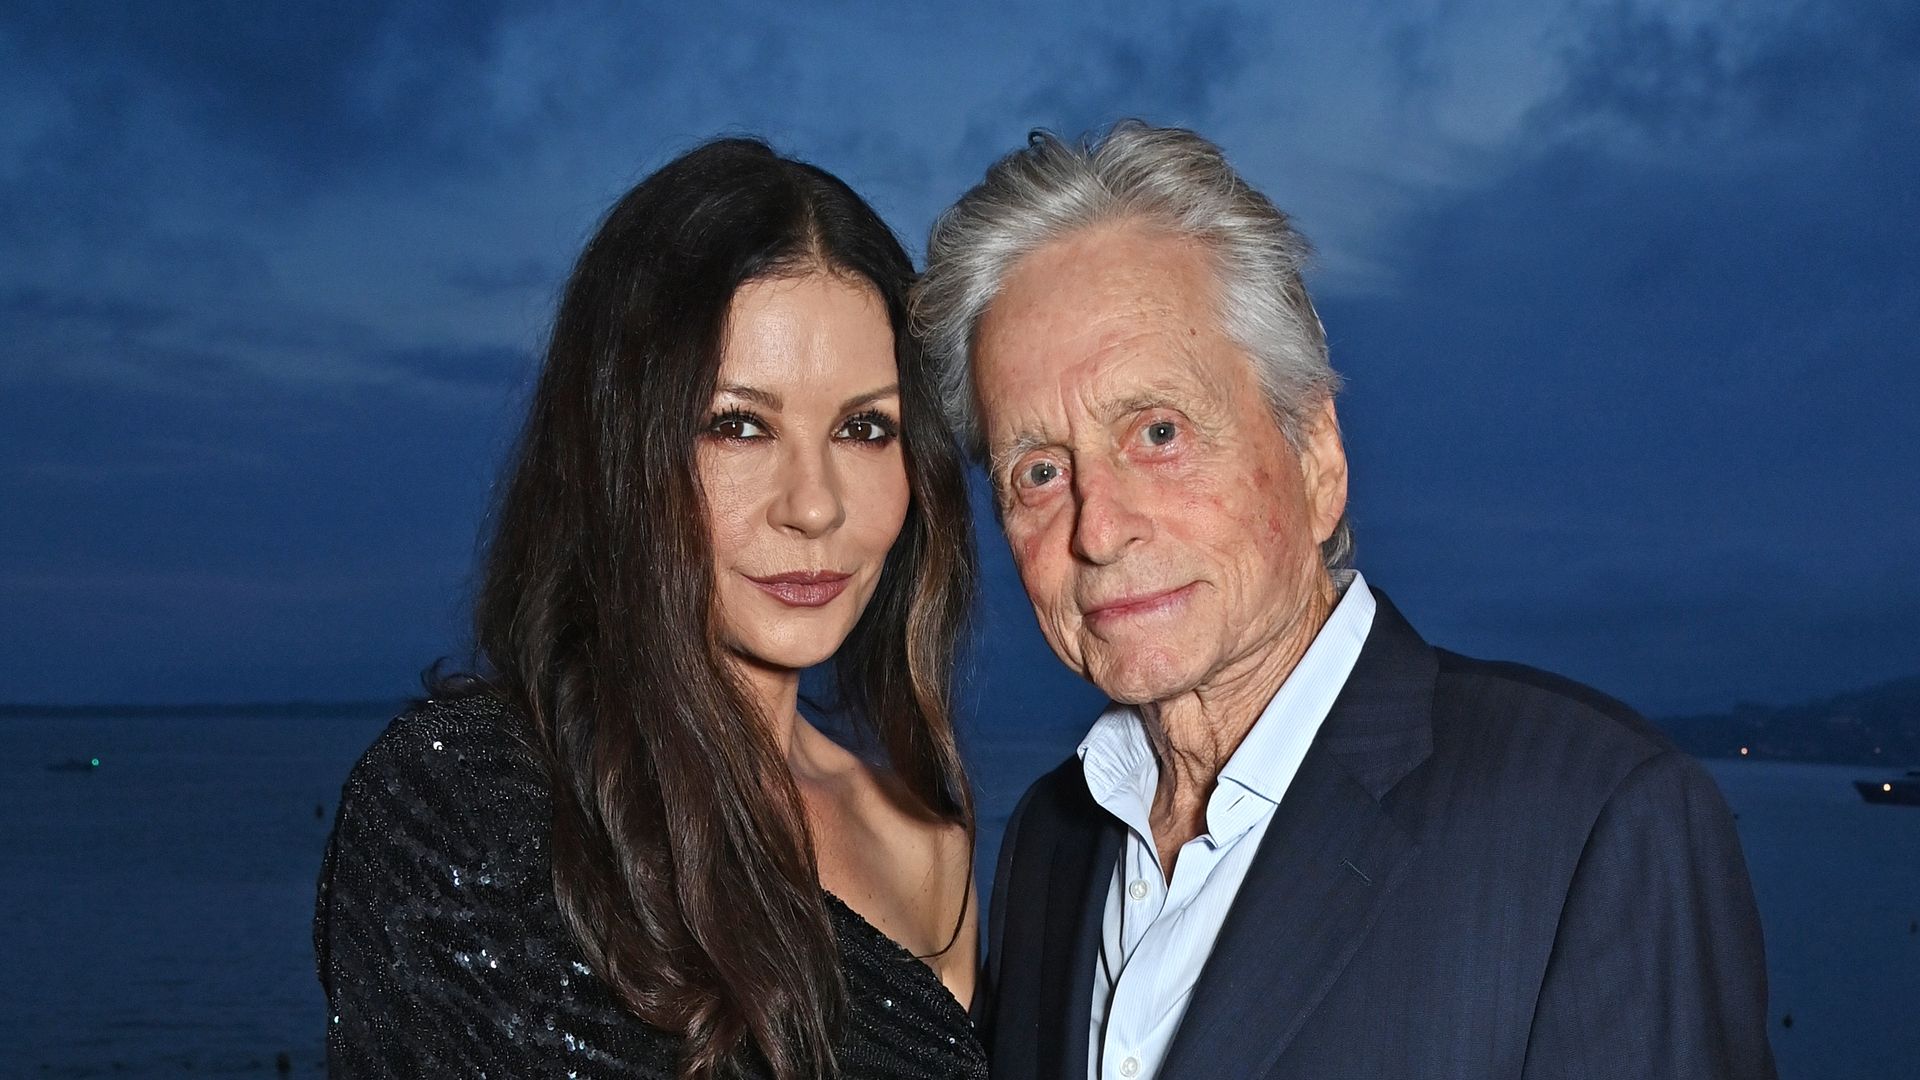 Michael Douglas makes rare public outing with wife Catherine Zeta-Jones and son Dylan Douglas